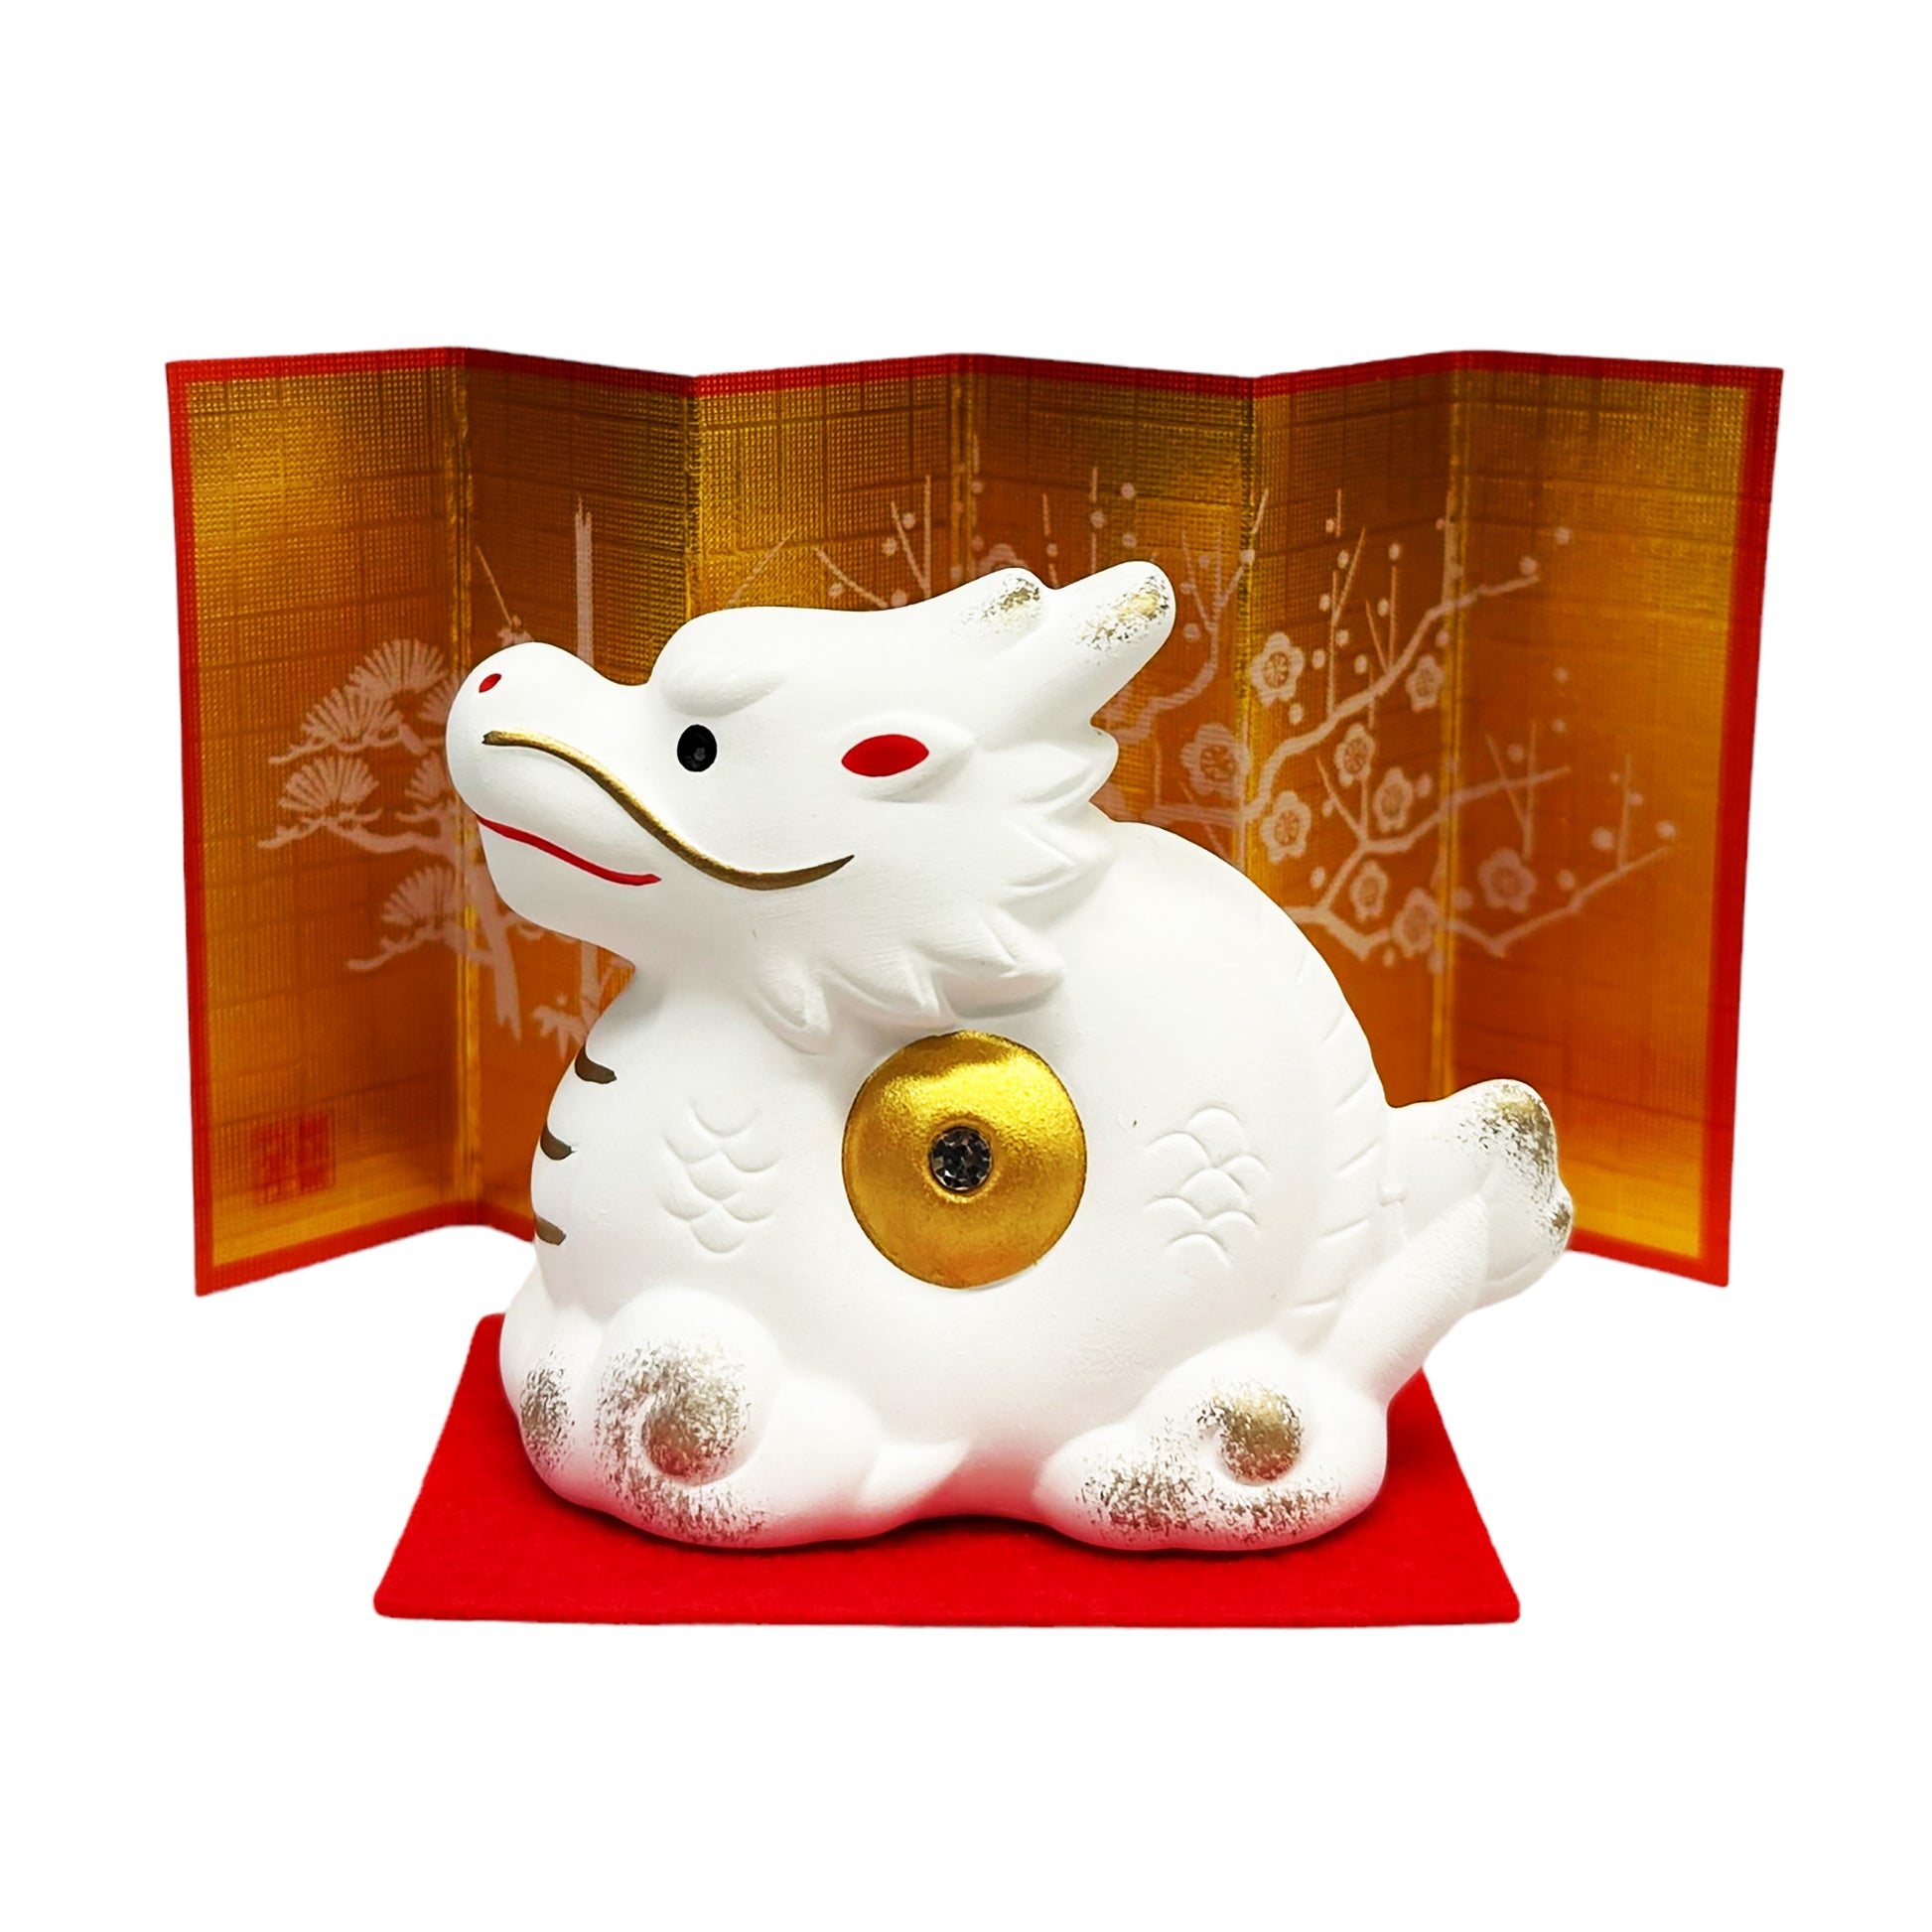 Front graphic image of Dragon With Gold Coin Ornament Figurine Set 3 X 2.5 X 1.5 Inches